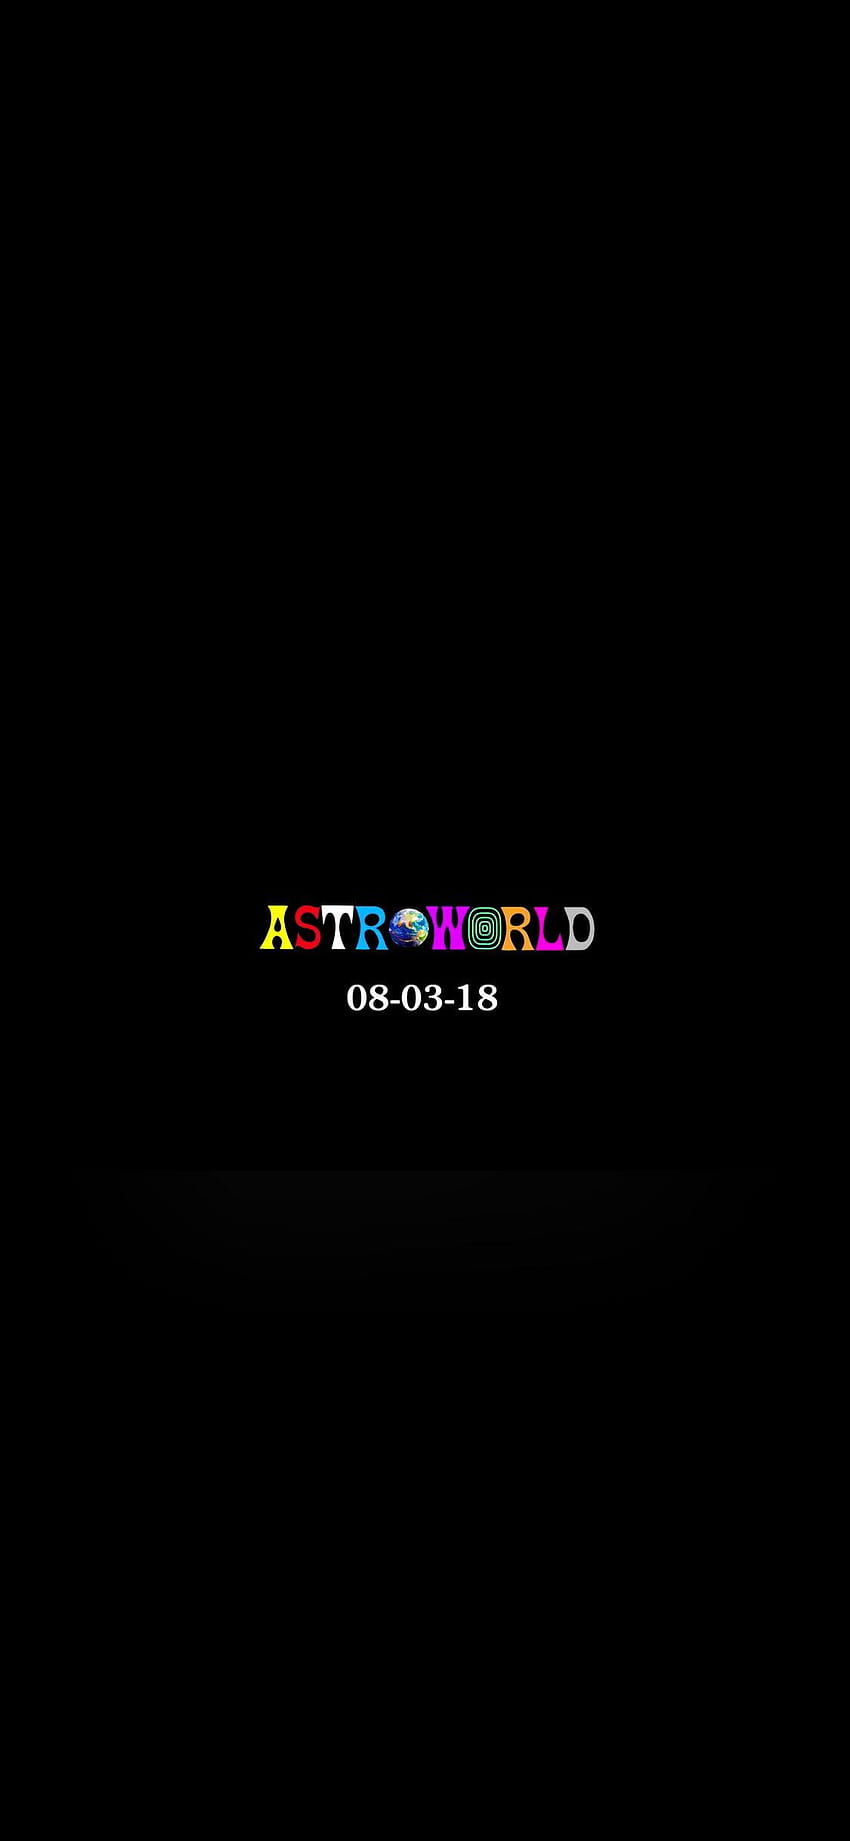 Astroworld from Apple Music trailer, astroworld iphone HD phone wallpaper